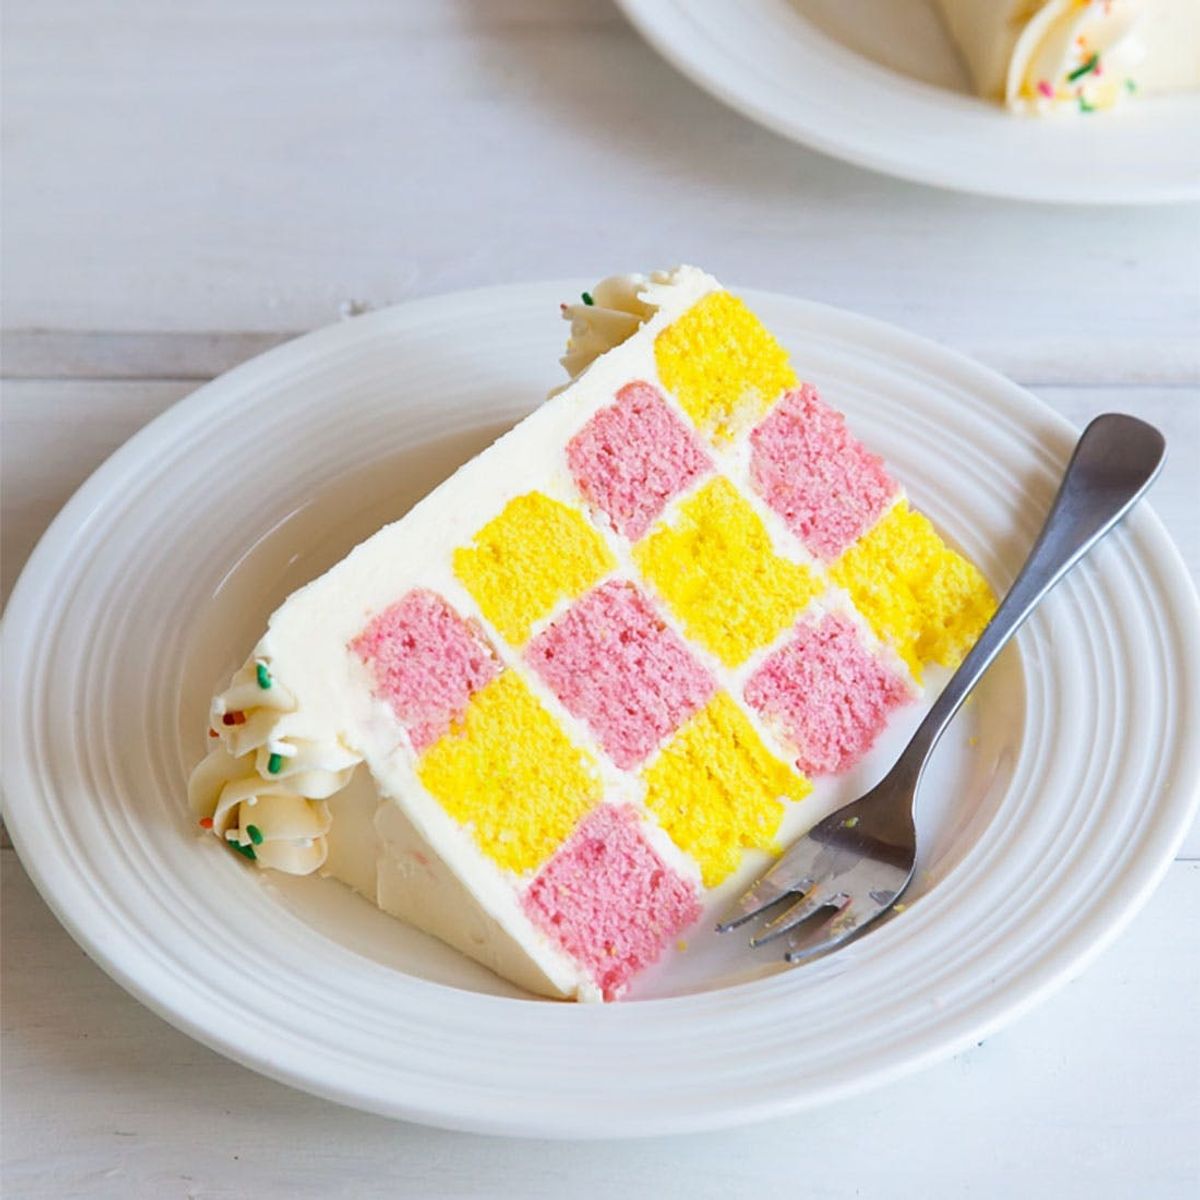 How to Make a Checkerboard Cake That Will Blow Your Guests' Minds